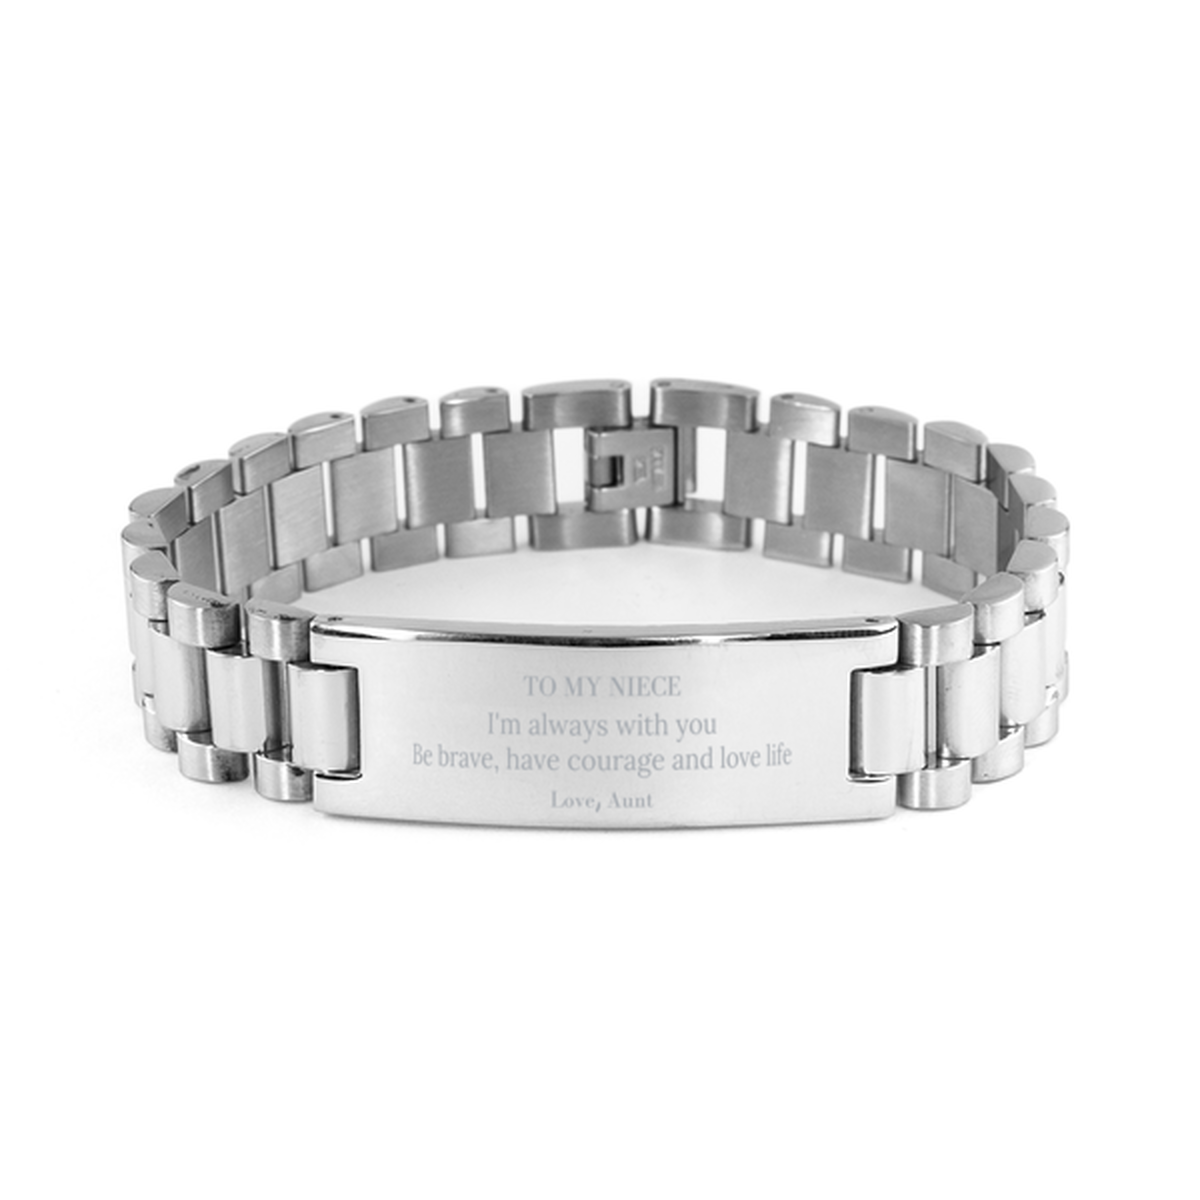 To My Niece Gifts from Aunt, Unique Ladder Stainless Steel Bracelet Inspirational Christmas Birthday Graduation Gifts for Niece I'm always with you. Be brave, have courage and love life. Love, Aunt